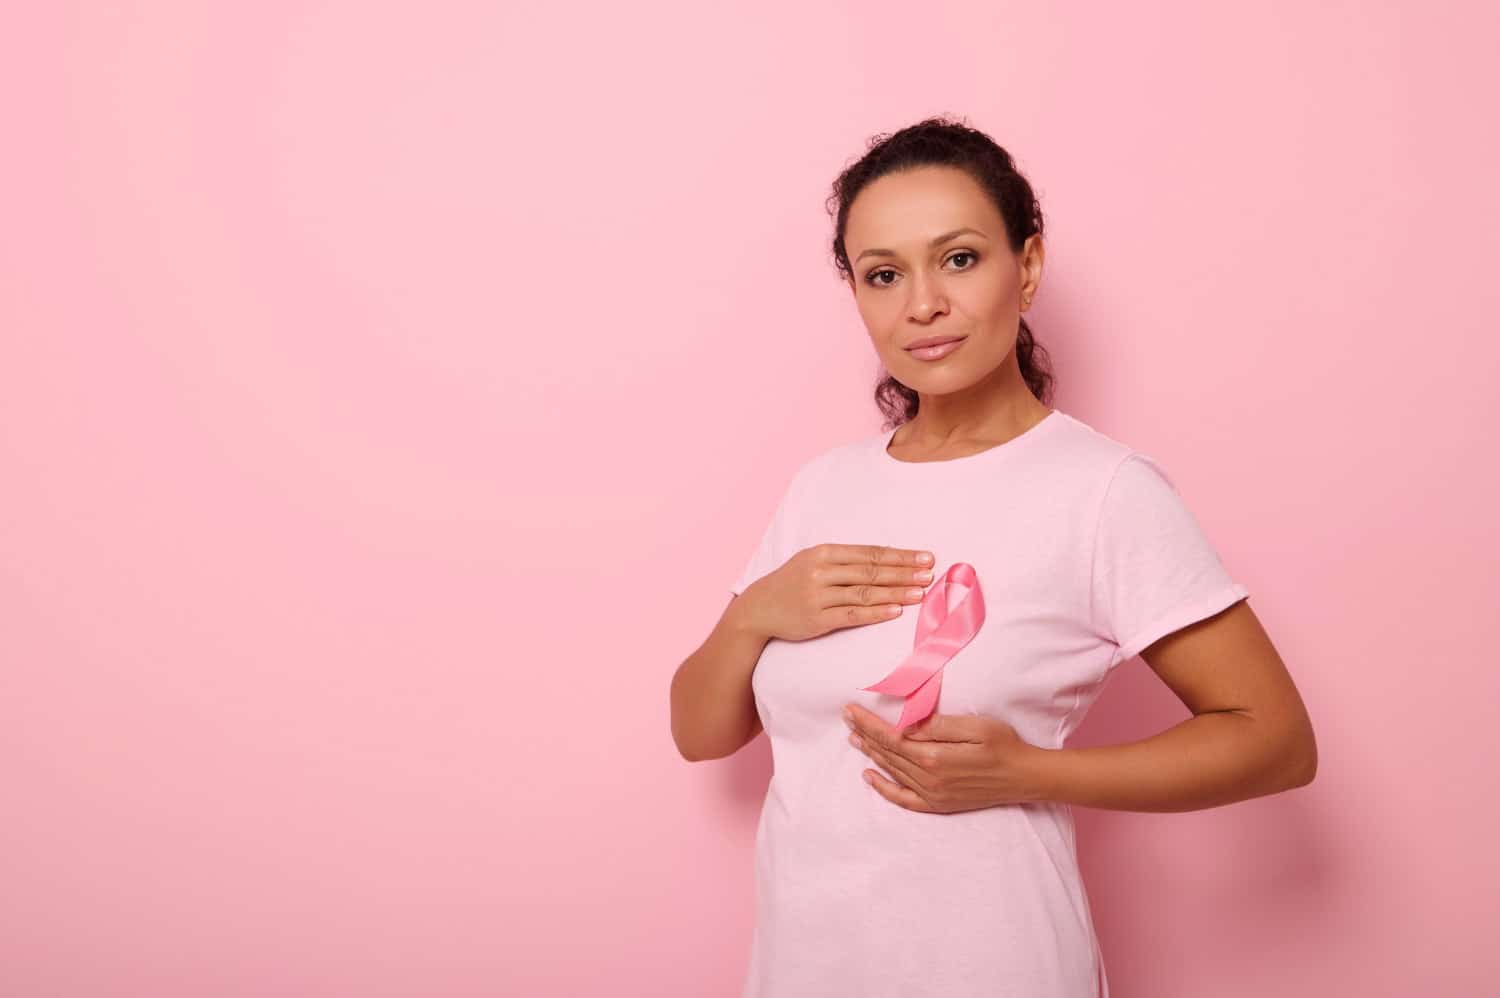 Image showing african american woman puts hands around pink ribbon on her pink t shirt.